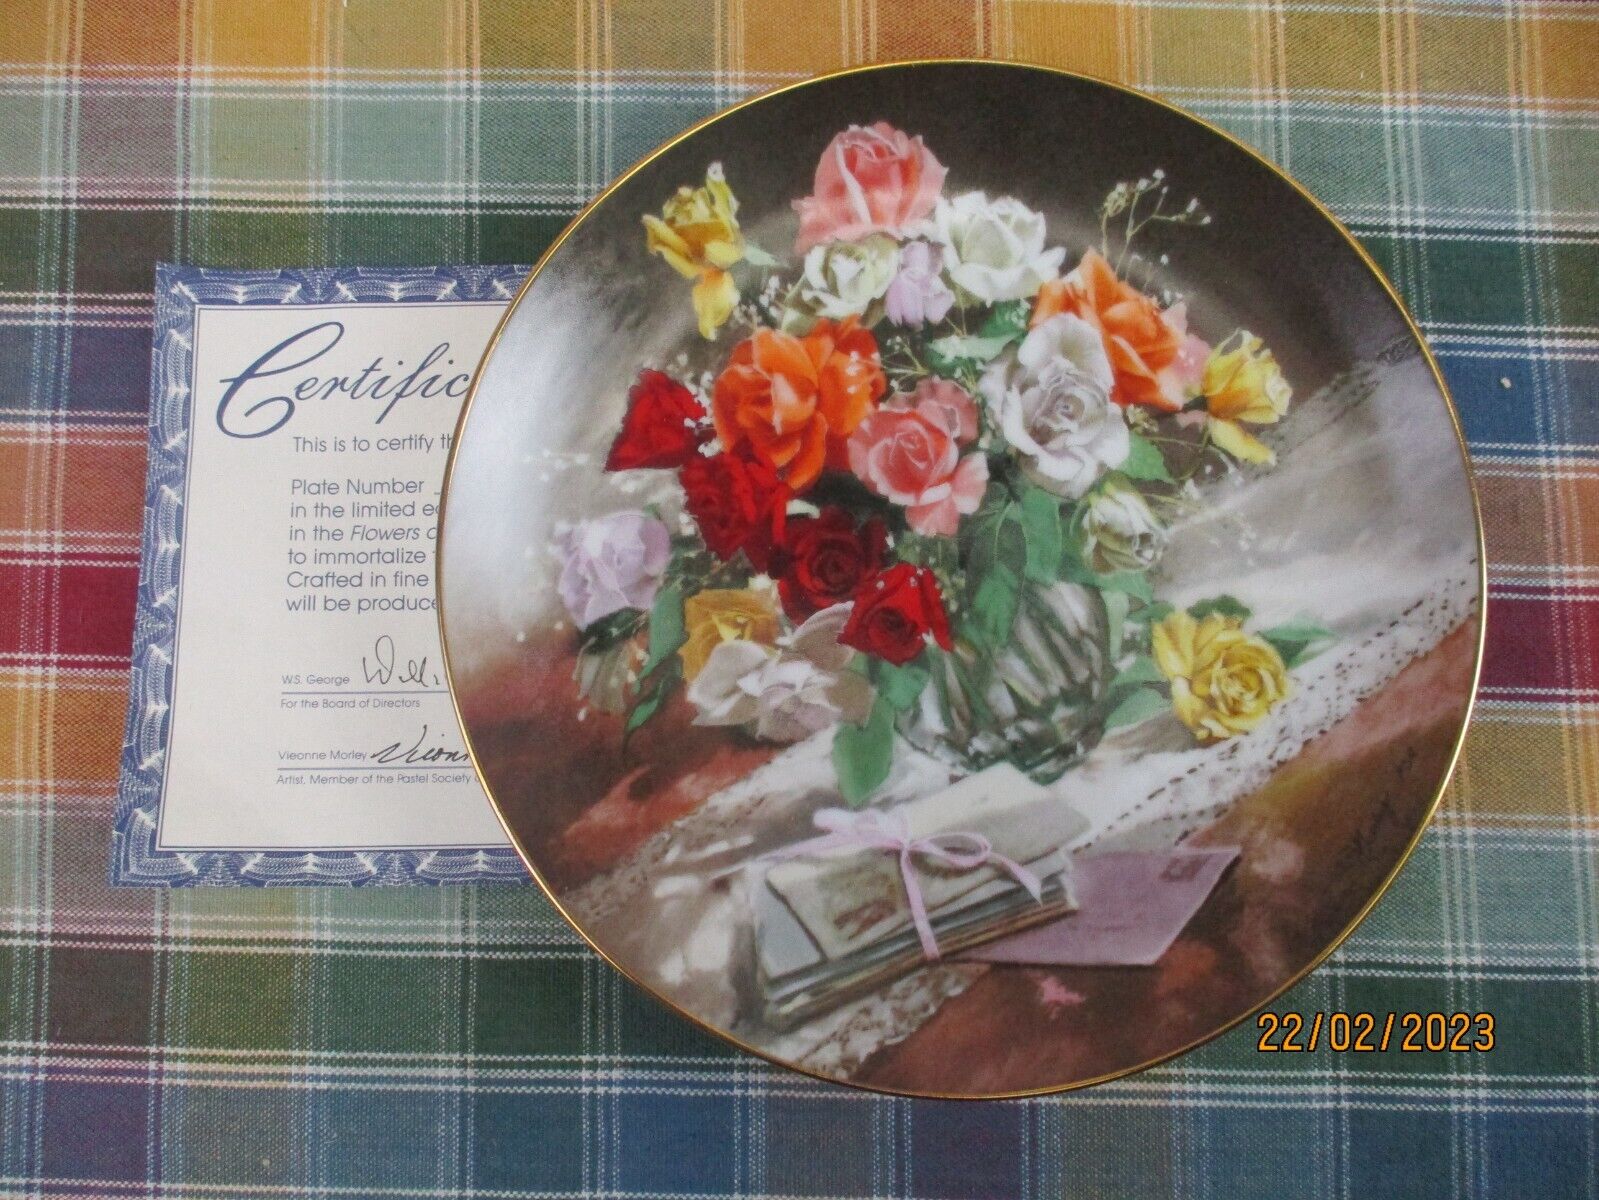 ONE -- Flowers of Your Garden Series Collector Plates - Vieonne Morley 1988/89